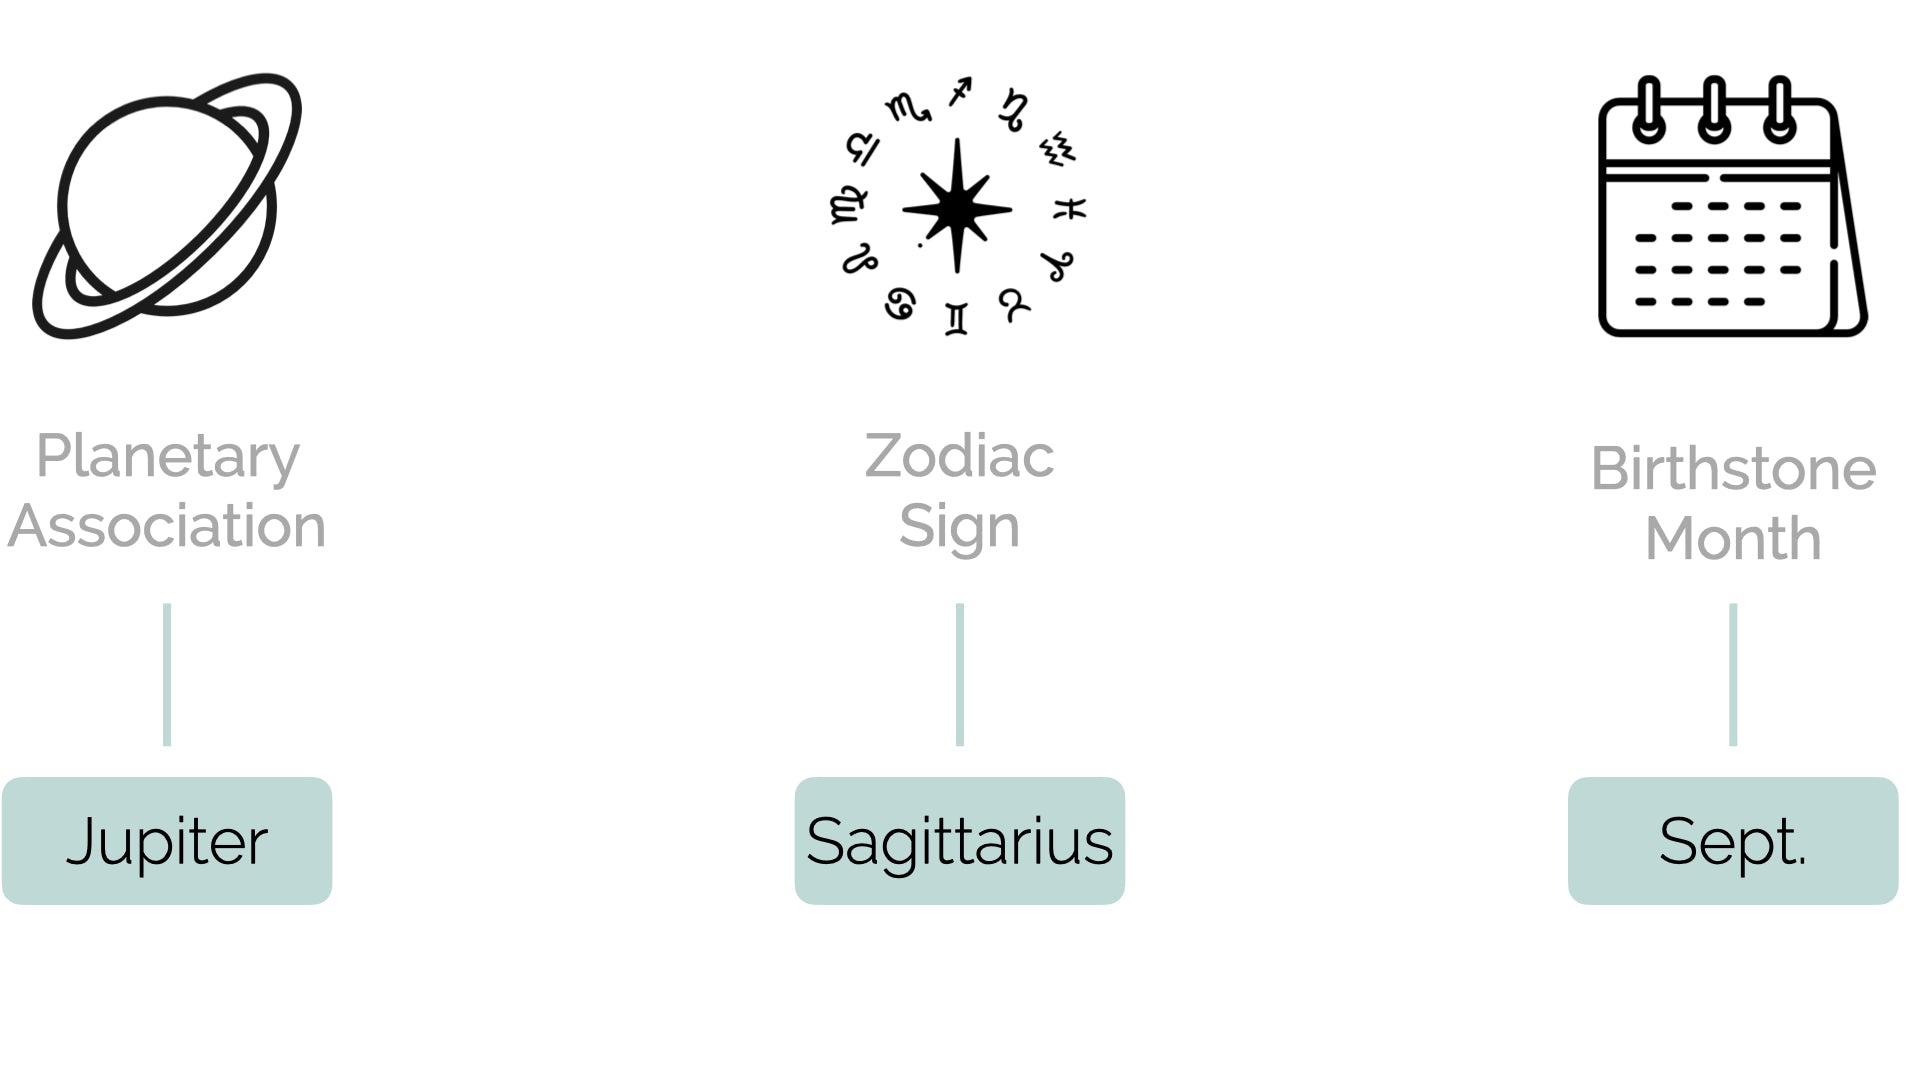 Diagram depicting the planetary association, birthstone month, and zodiac sign for yellow sapphires (Pukhraj)